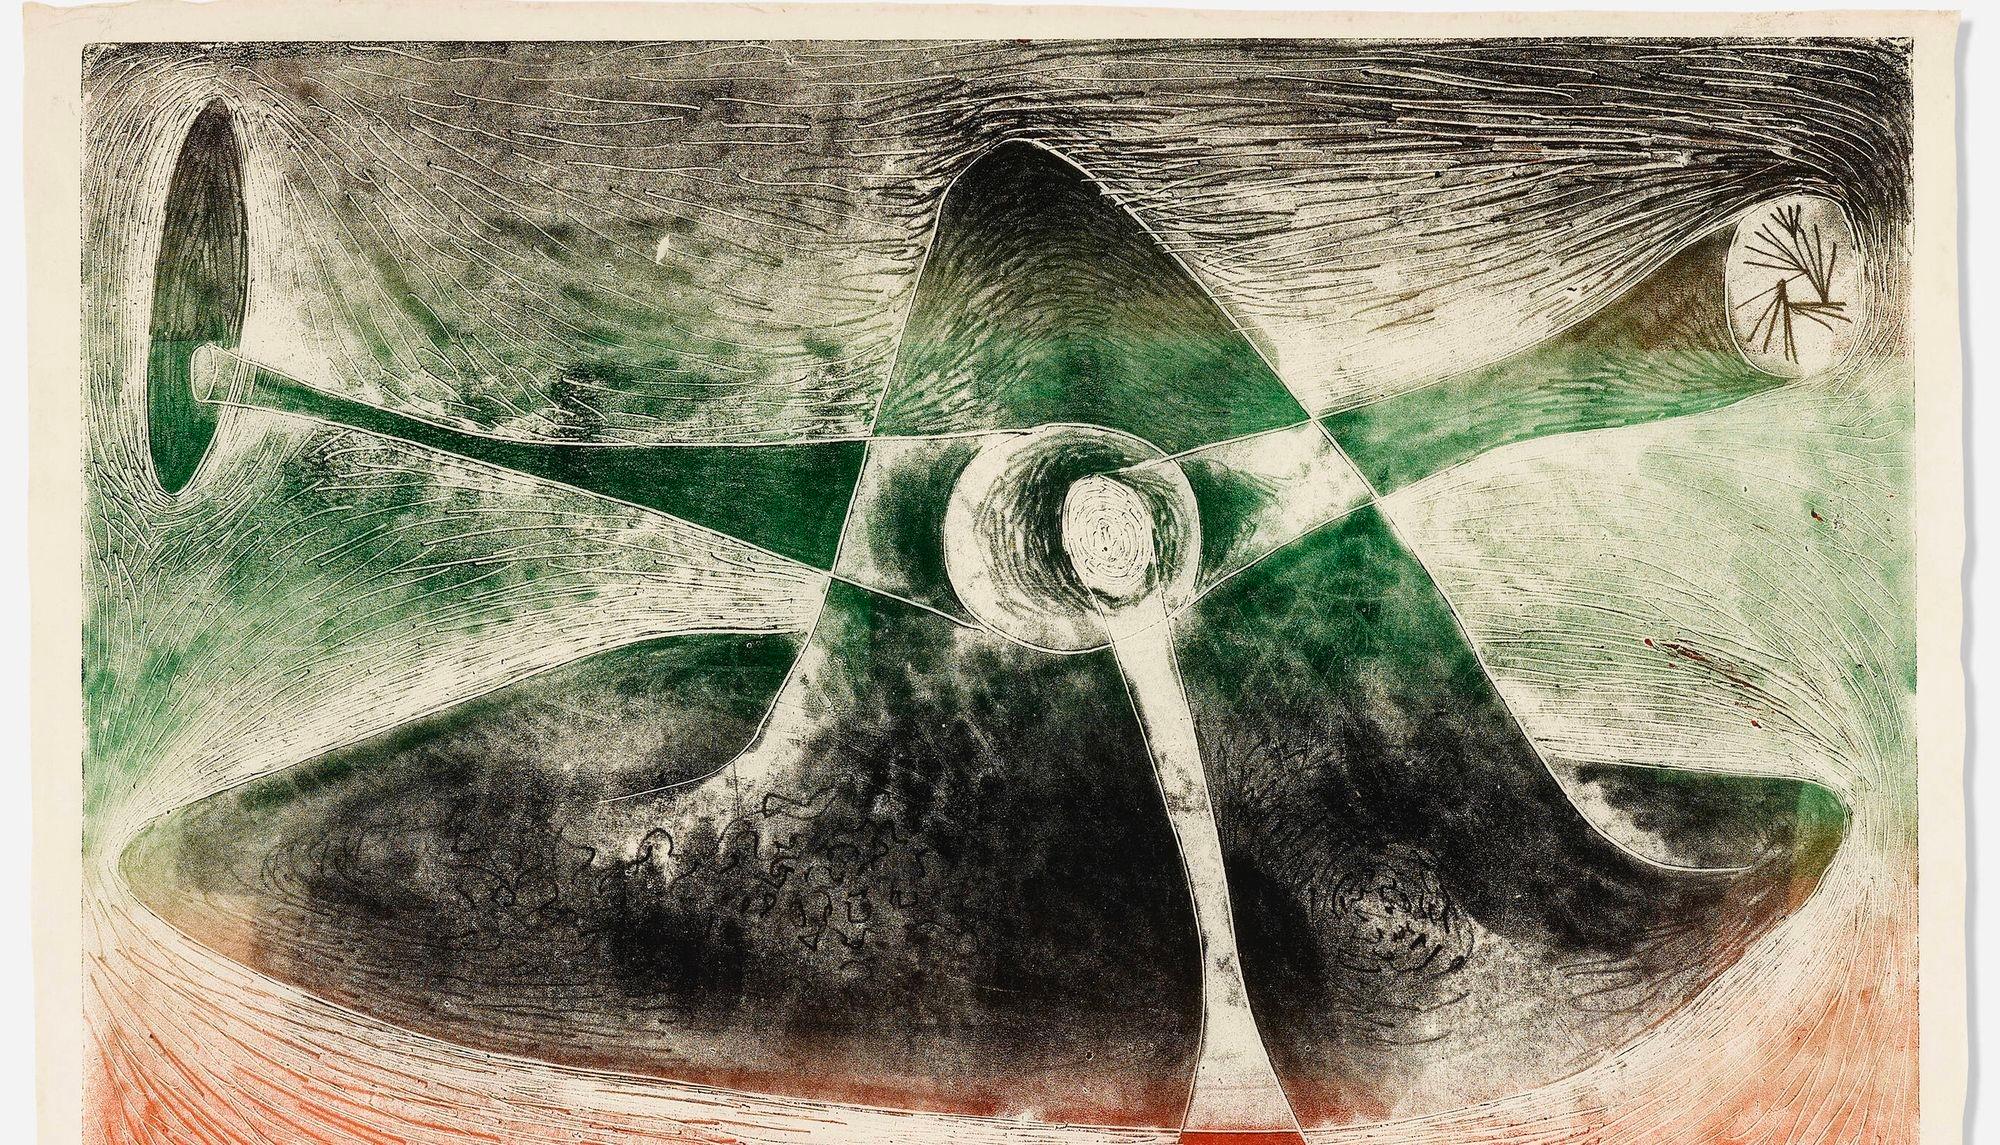 Early Important Harry Bertoia Monotype One of his first works on paper, Monoprint on Rice Raper
Signed to verso ‘HB’. Inscribed to lower right '1264'. Sold with a certificate of authenticity from the Harry Bertoia Foundation.

Literature: Harry